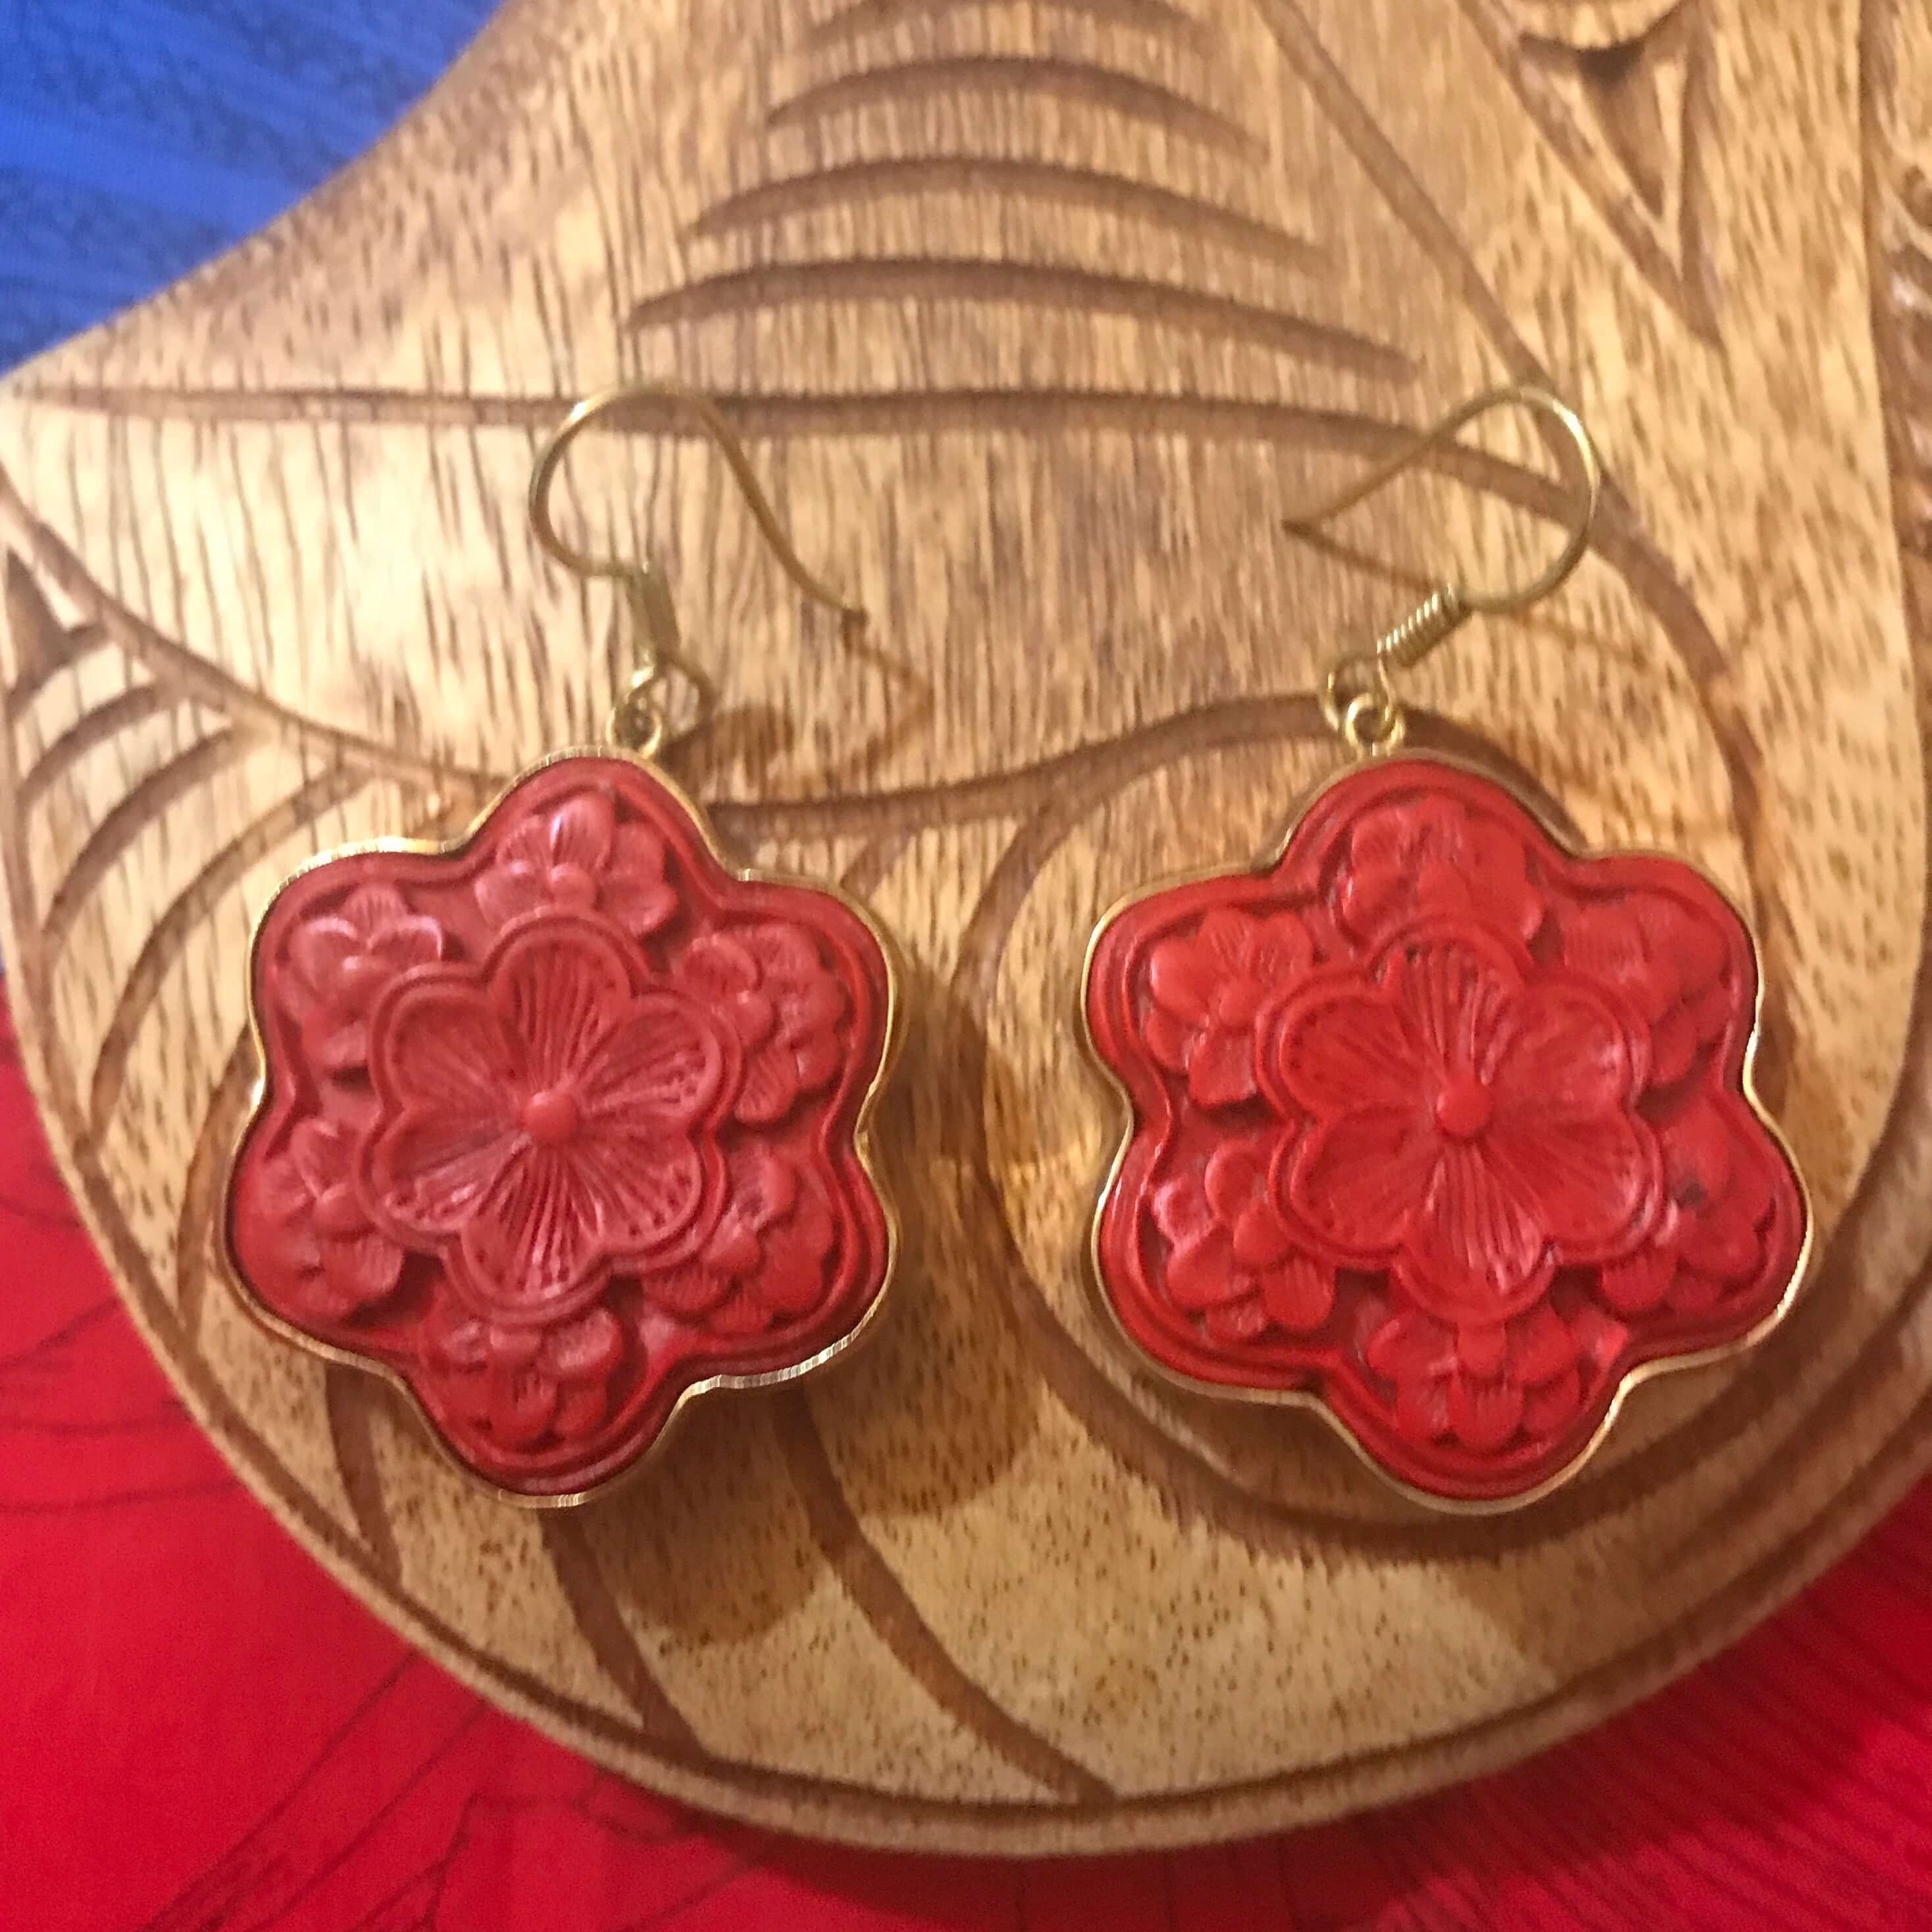 Island jewelry red cinnibar flower earrings with alchemia gold setting | Aloha Products USA